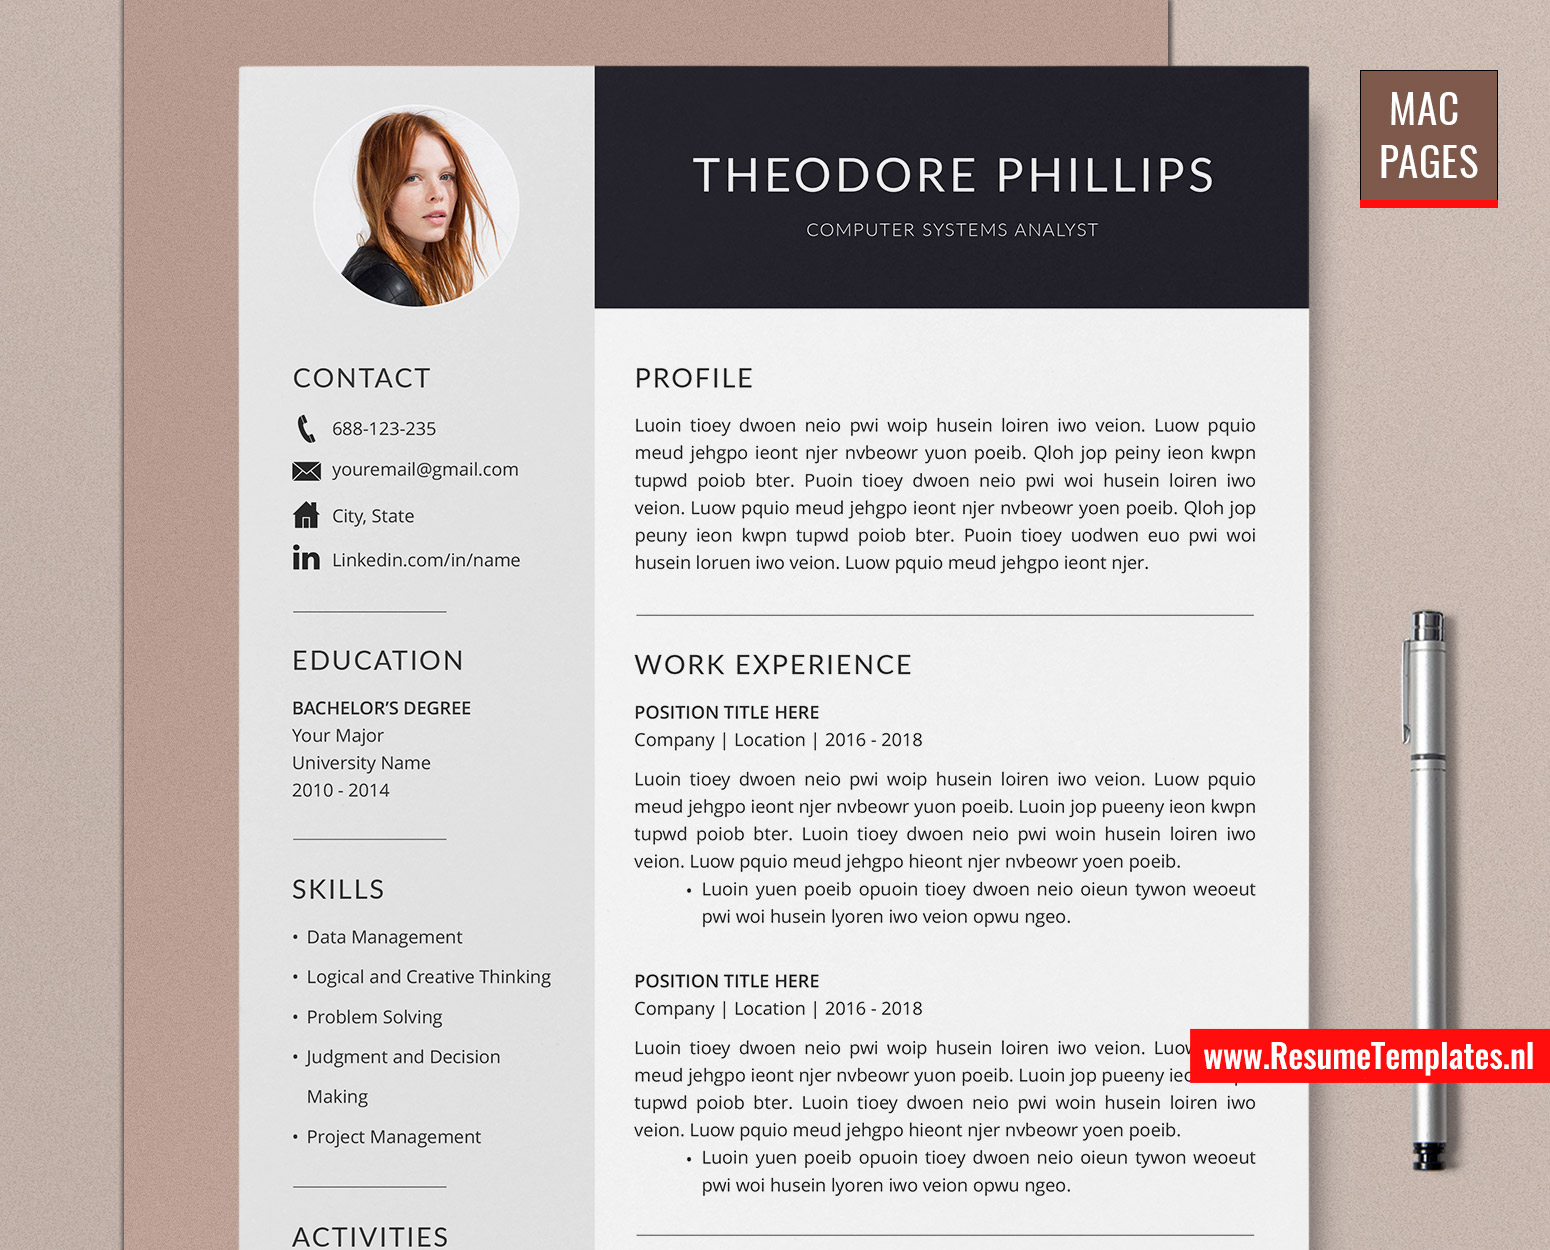 For Mac Pages: Professional CV Template for Mac Pages, with Cover ...